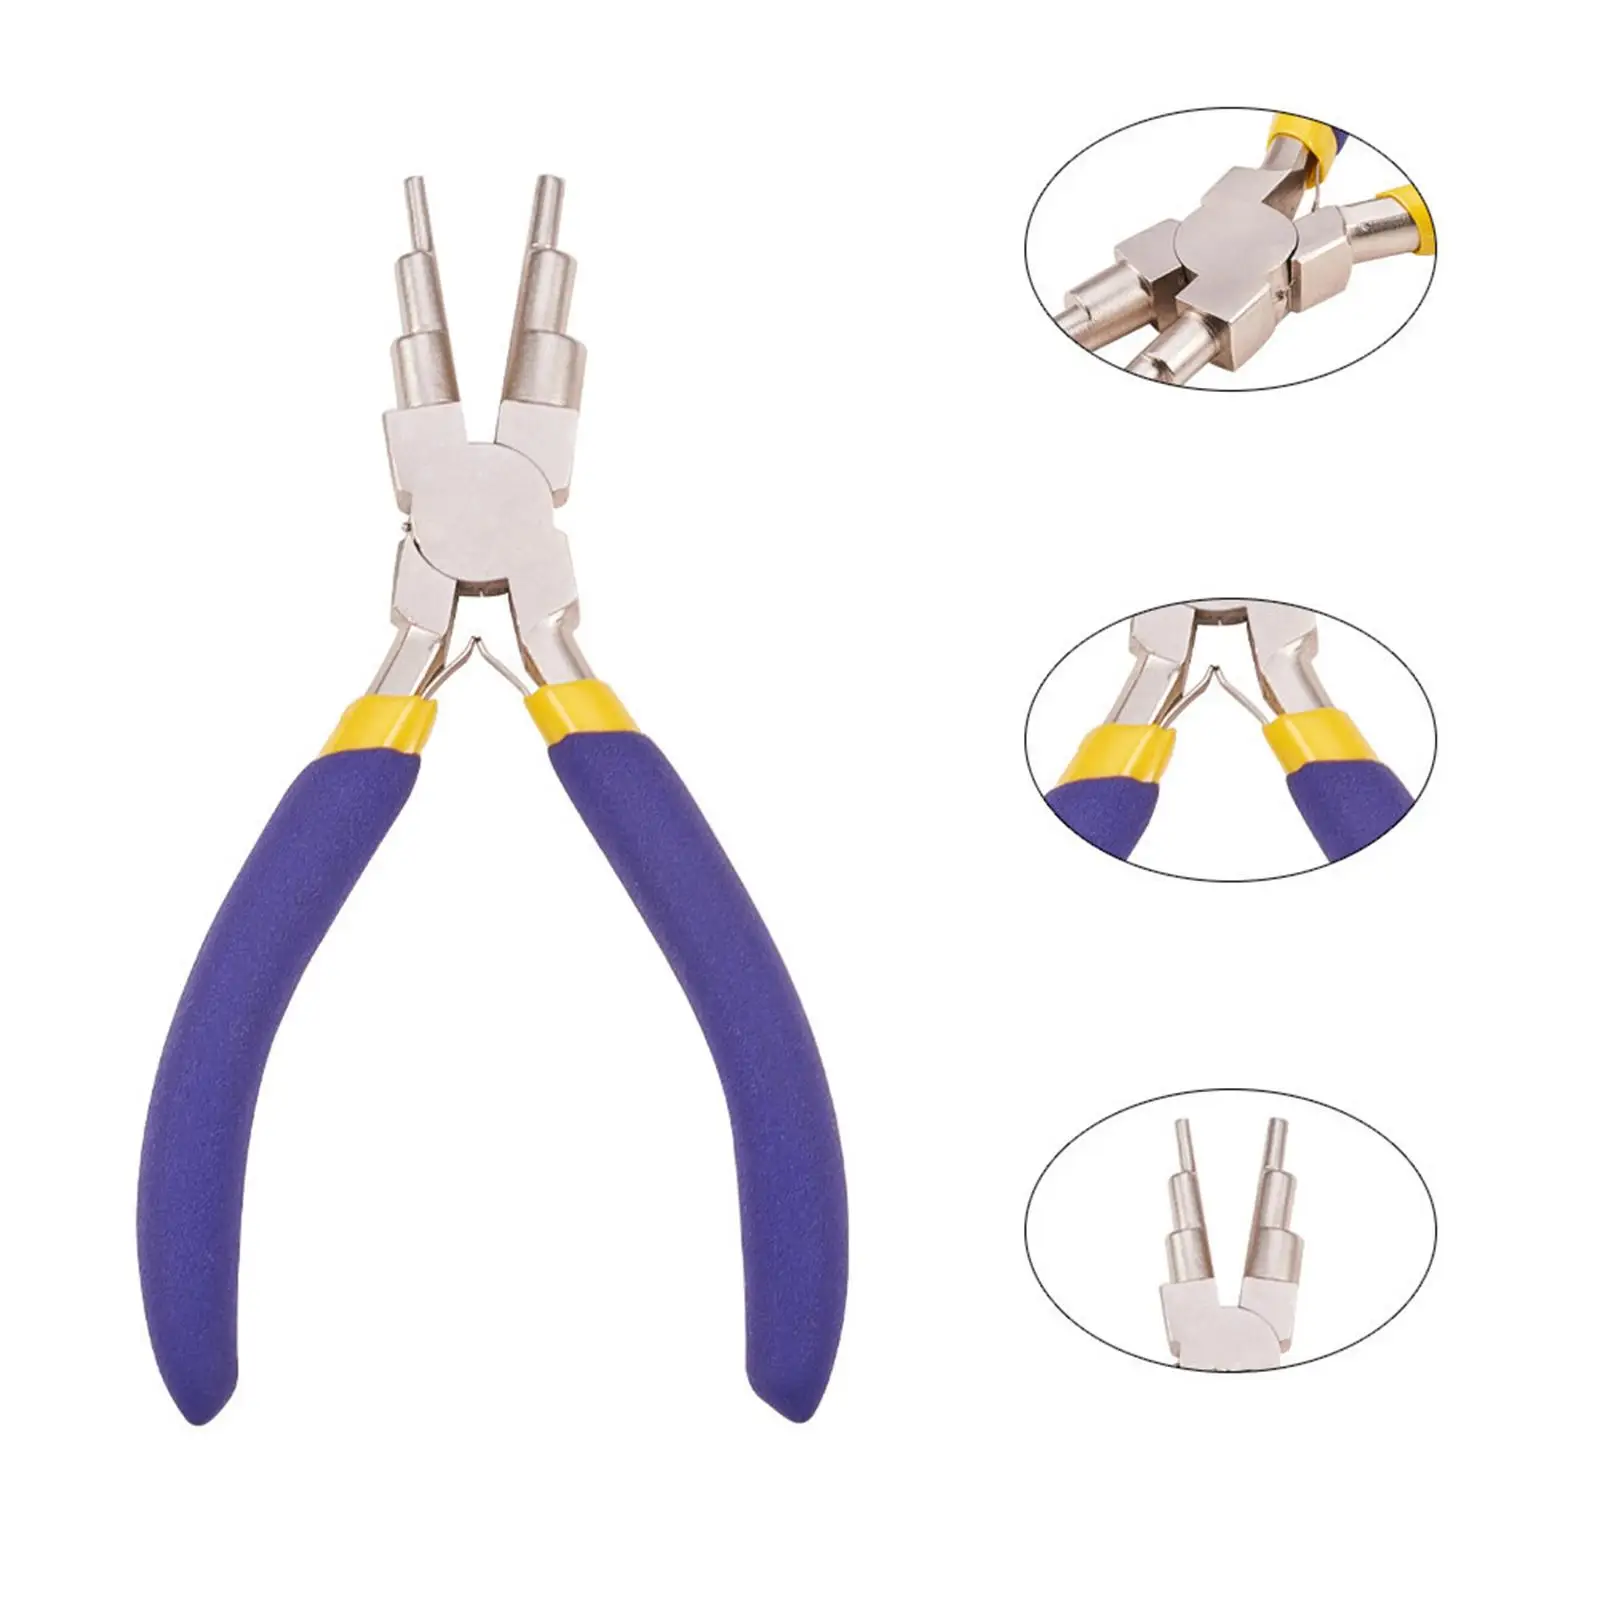 6 in 1 Bail Making Pliers Professional Portable Wire Looping Pliers for Wrapping Jump Rings DIY Crafts